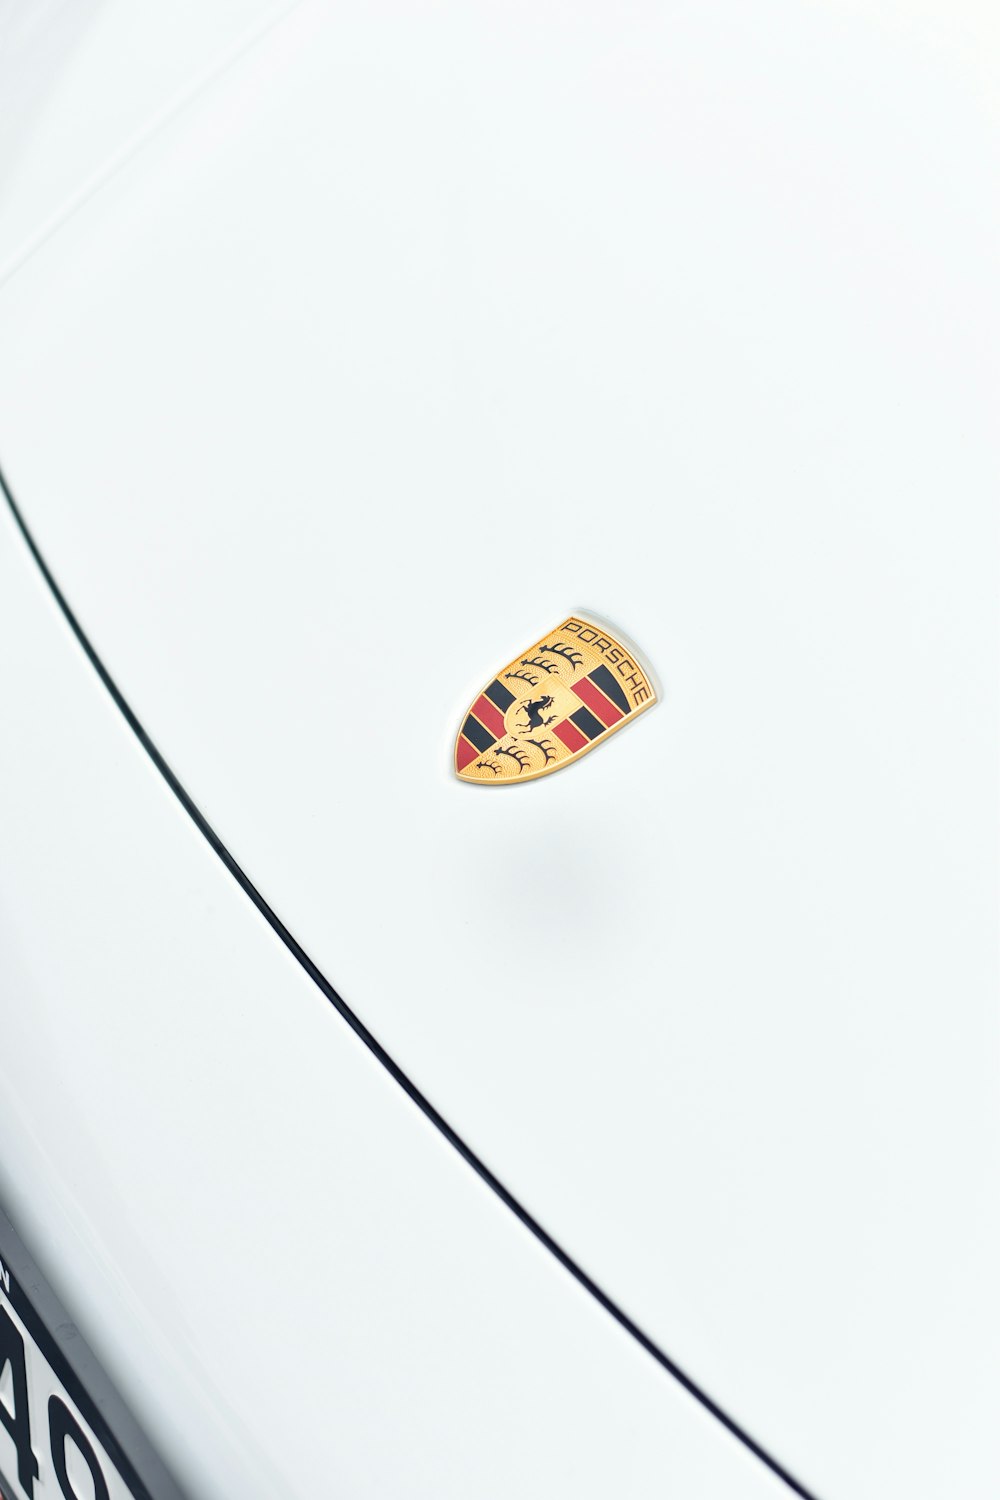 a close up of a car with a badge on it